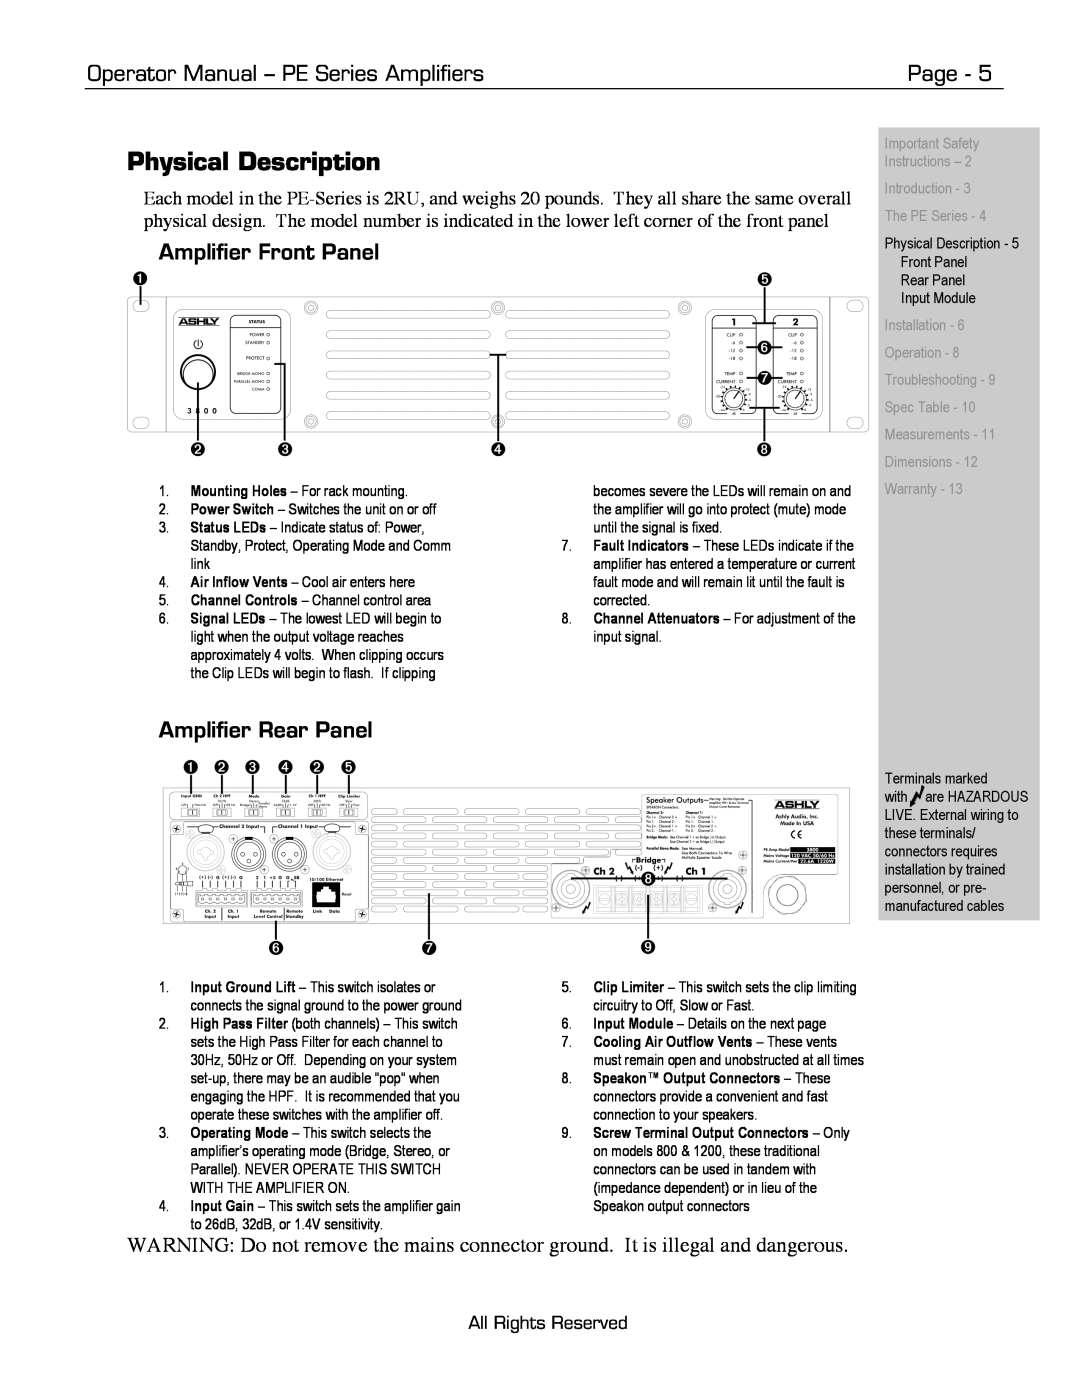 Ashly Physical Description, Amplifier Front Panel, Amplifier Rear Panel, Operator Manual - PE Series Amplifiers, Page 